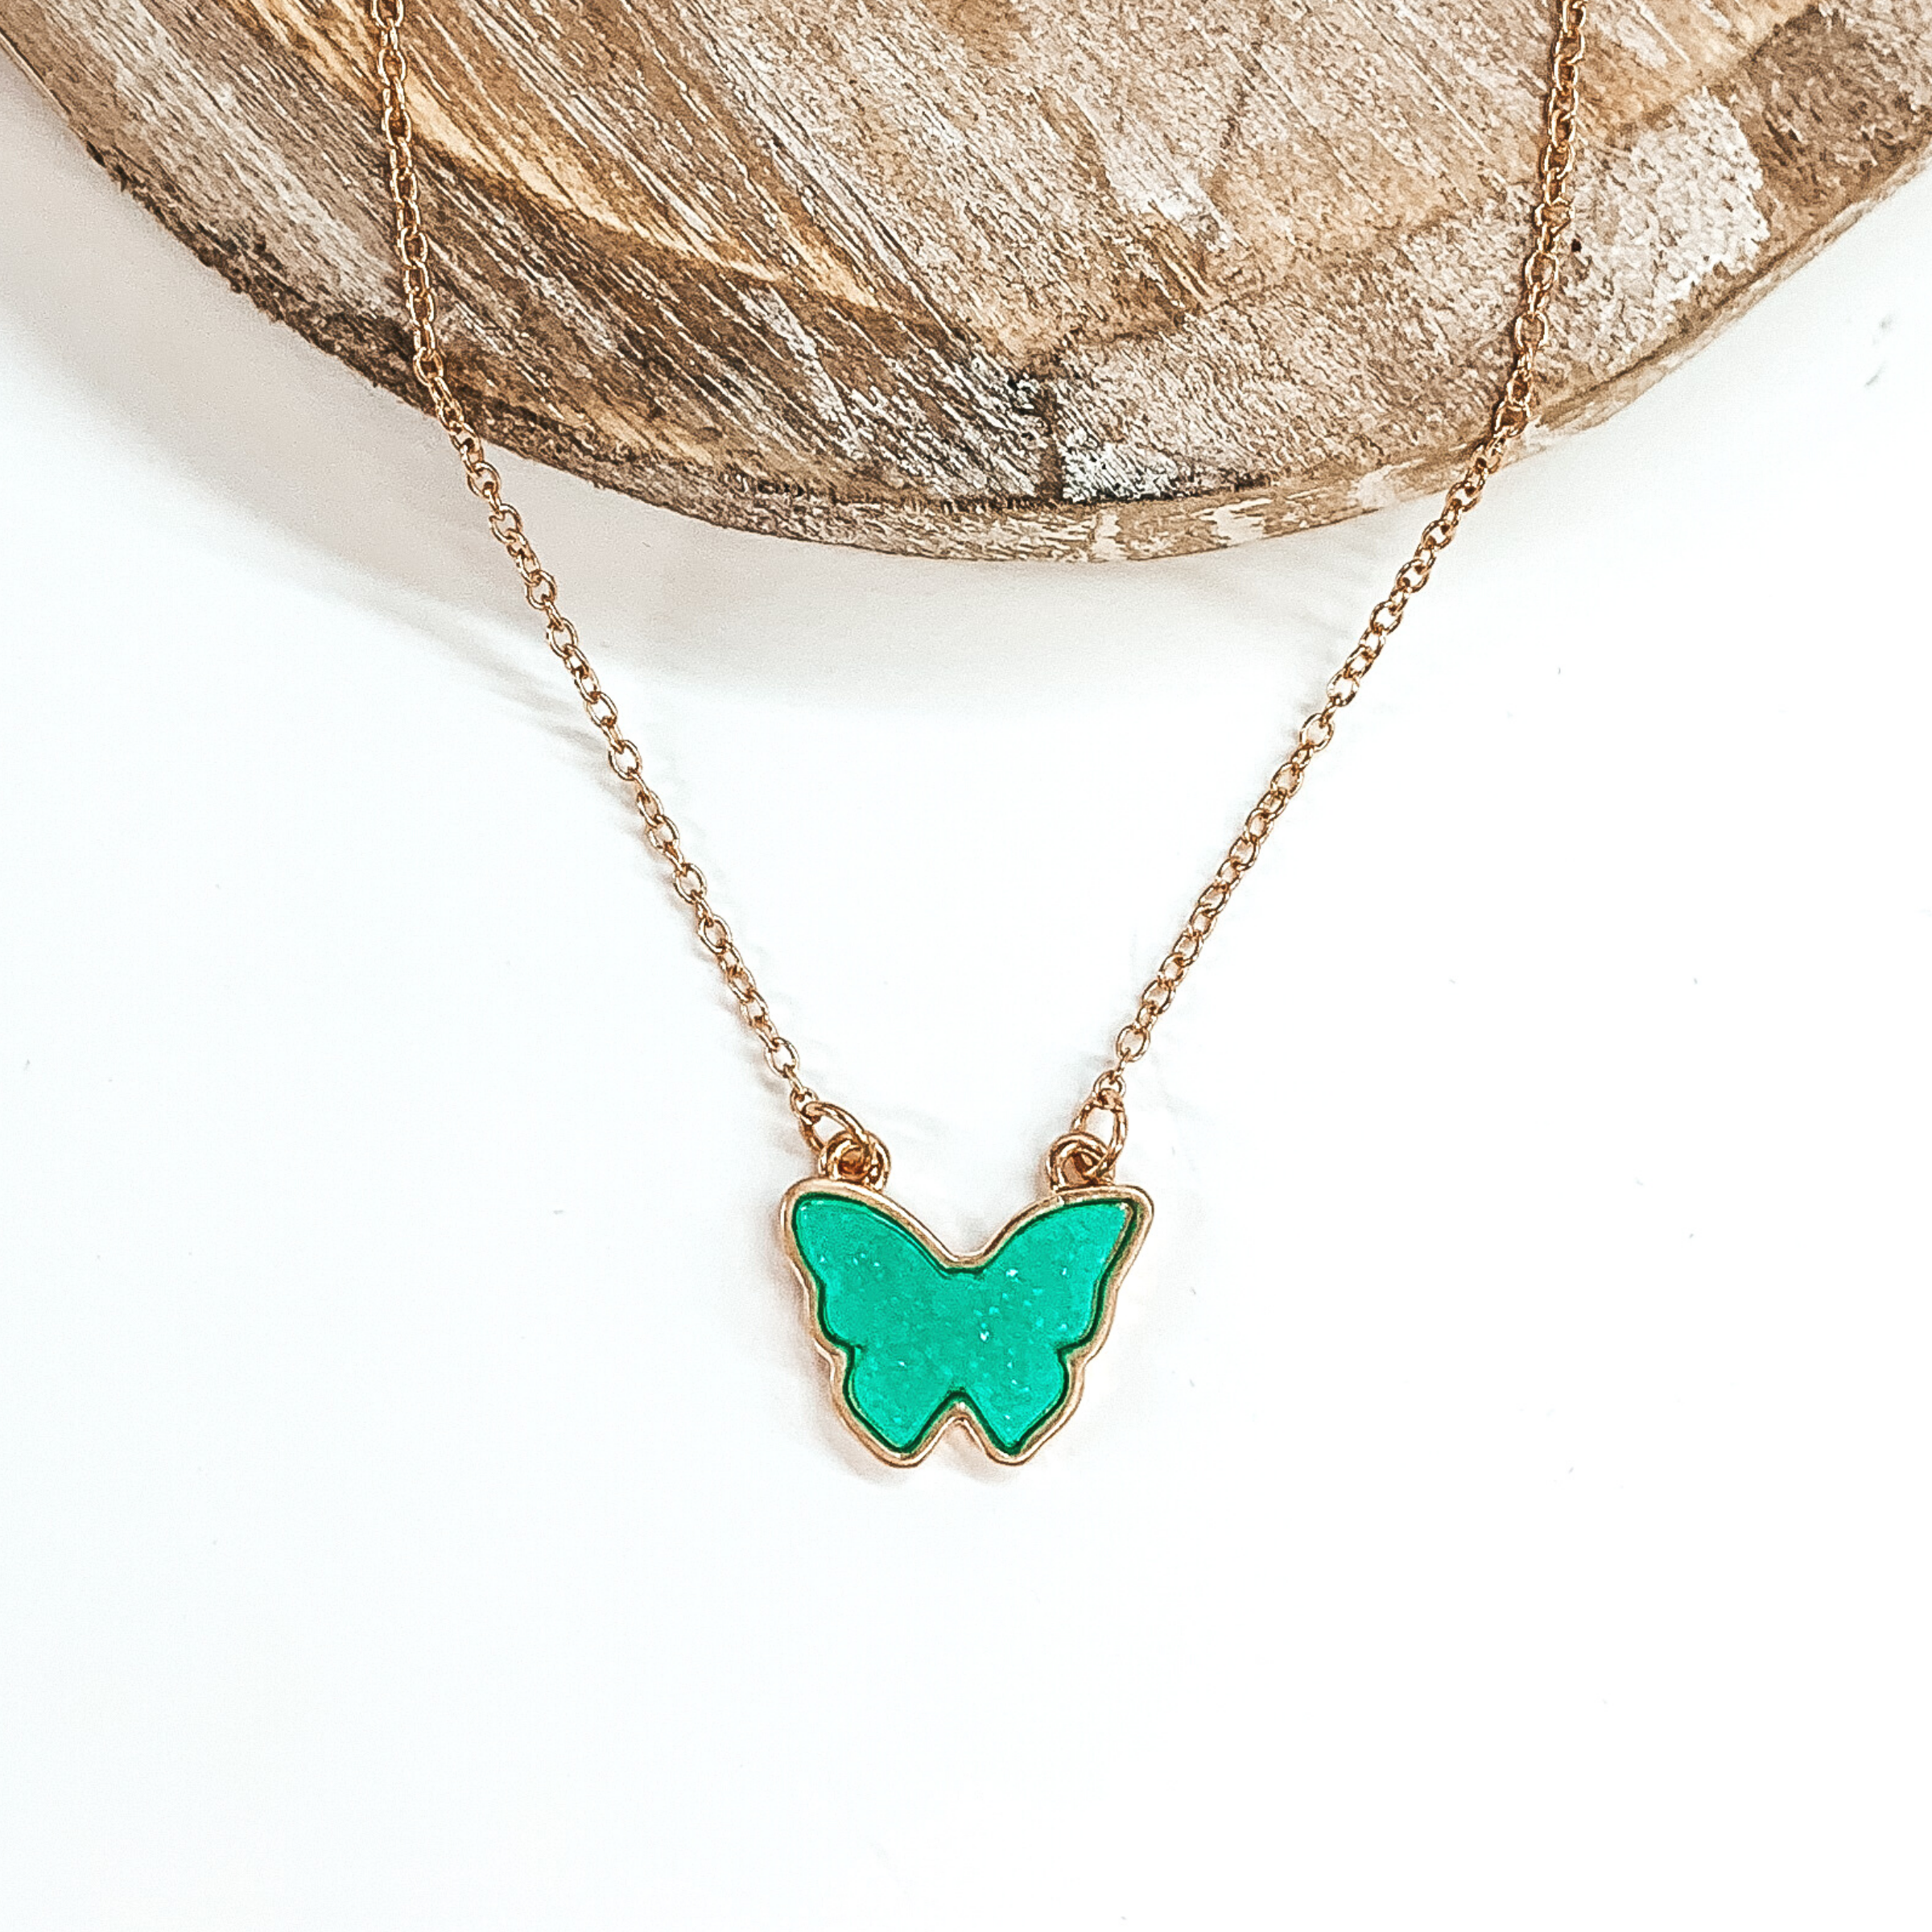 Tiny gold chained necklace includes a mint , druzy butterfly pendant that is outlined in gold. This necklace is pictured on a white background with a tan piece of wood at the top of the picture.